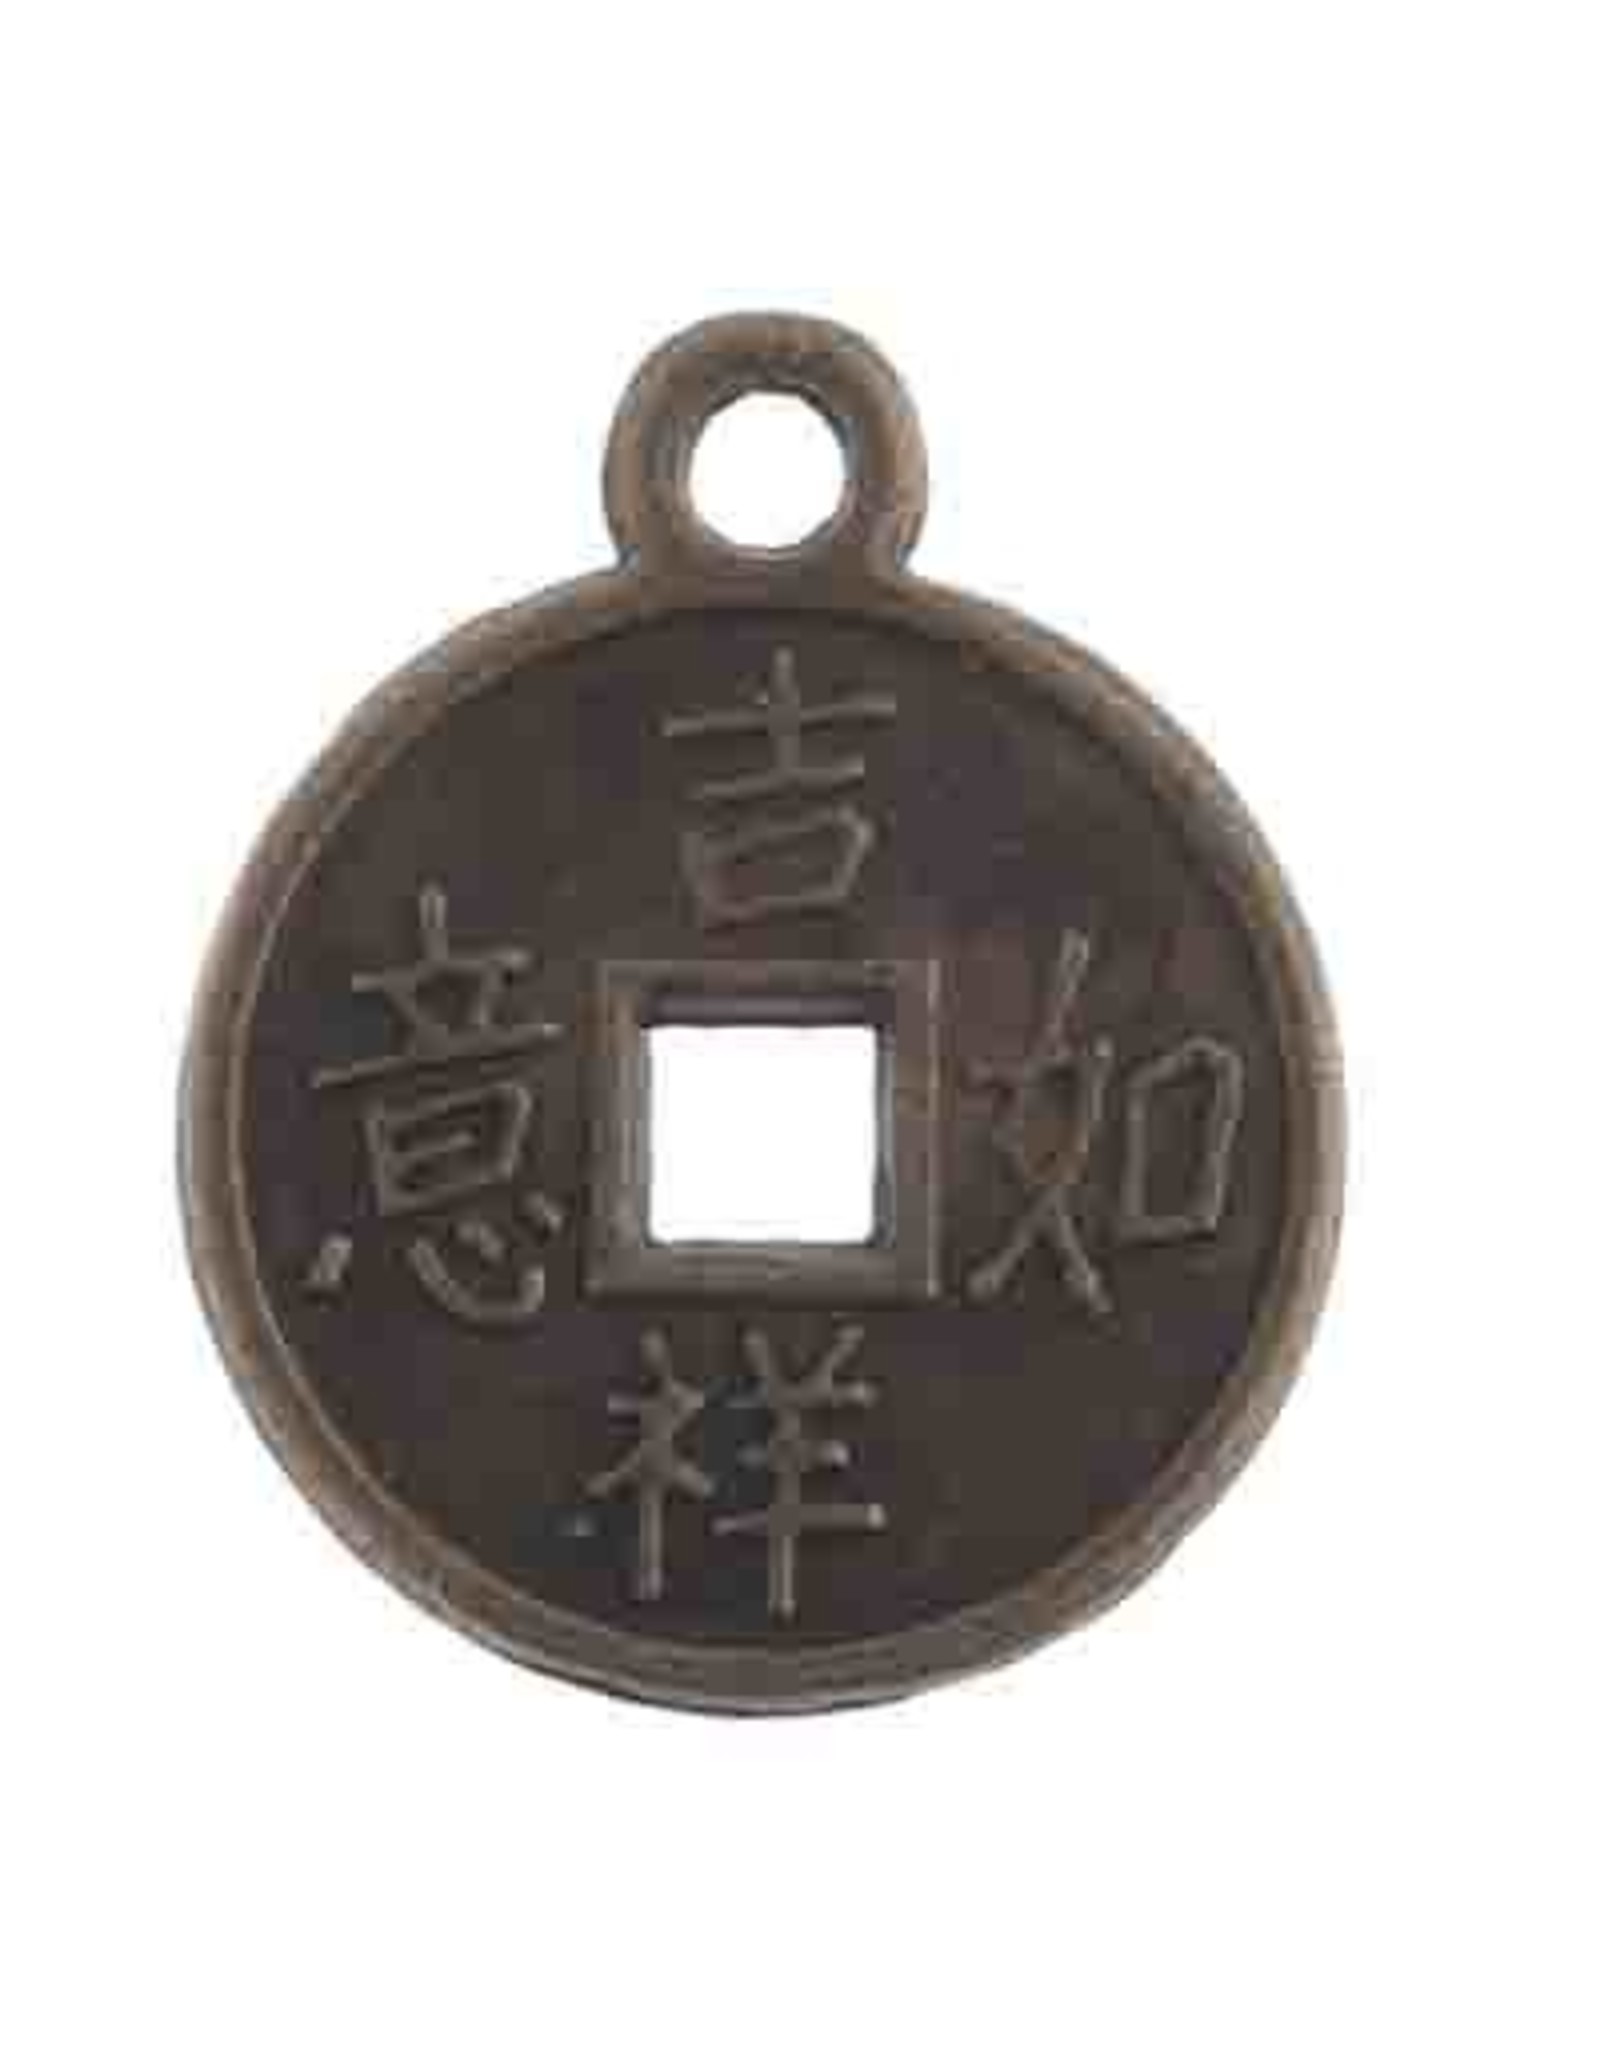 Chinese Coin 14mm Antique Brass x10